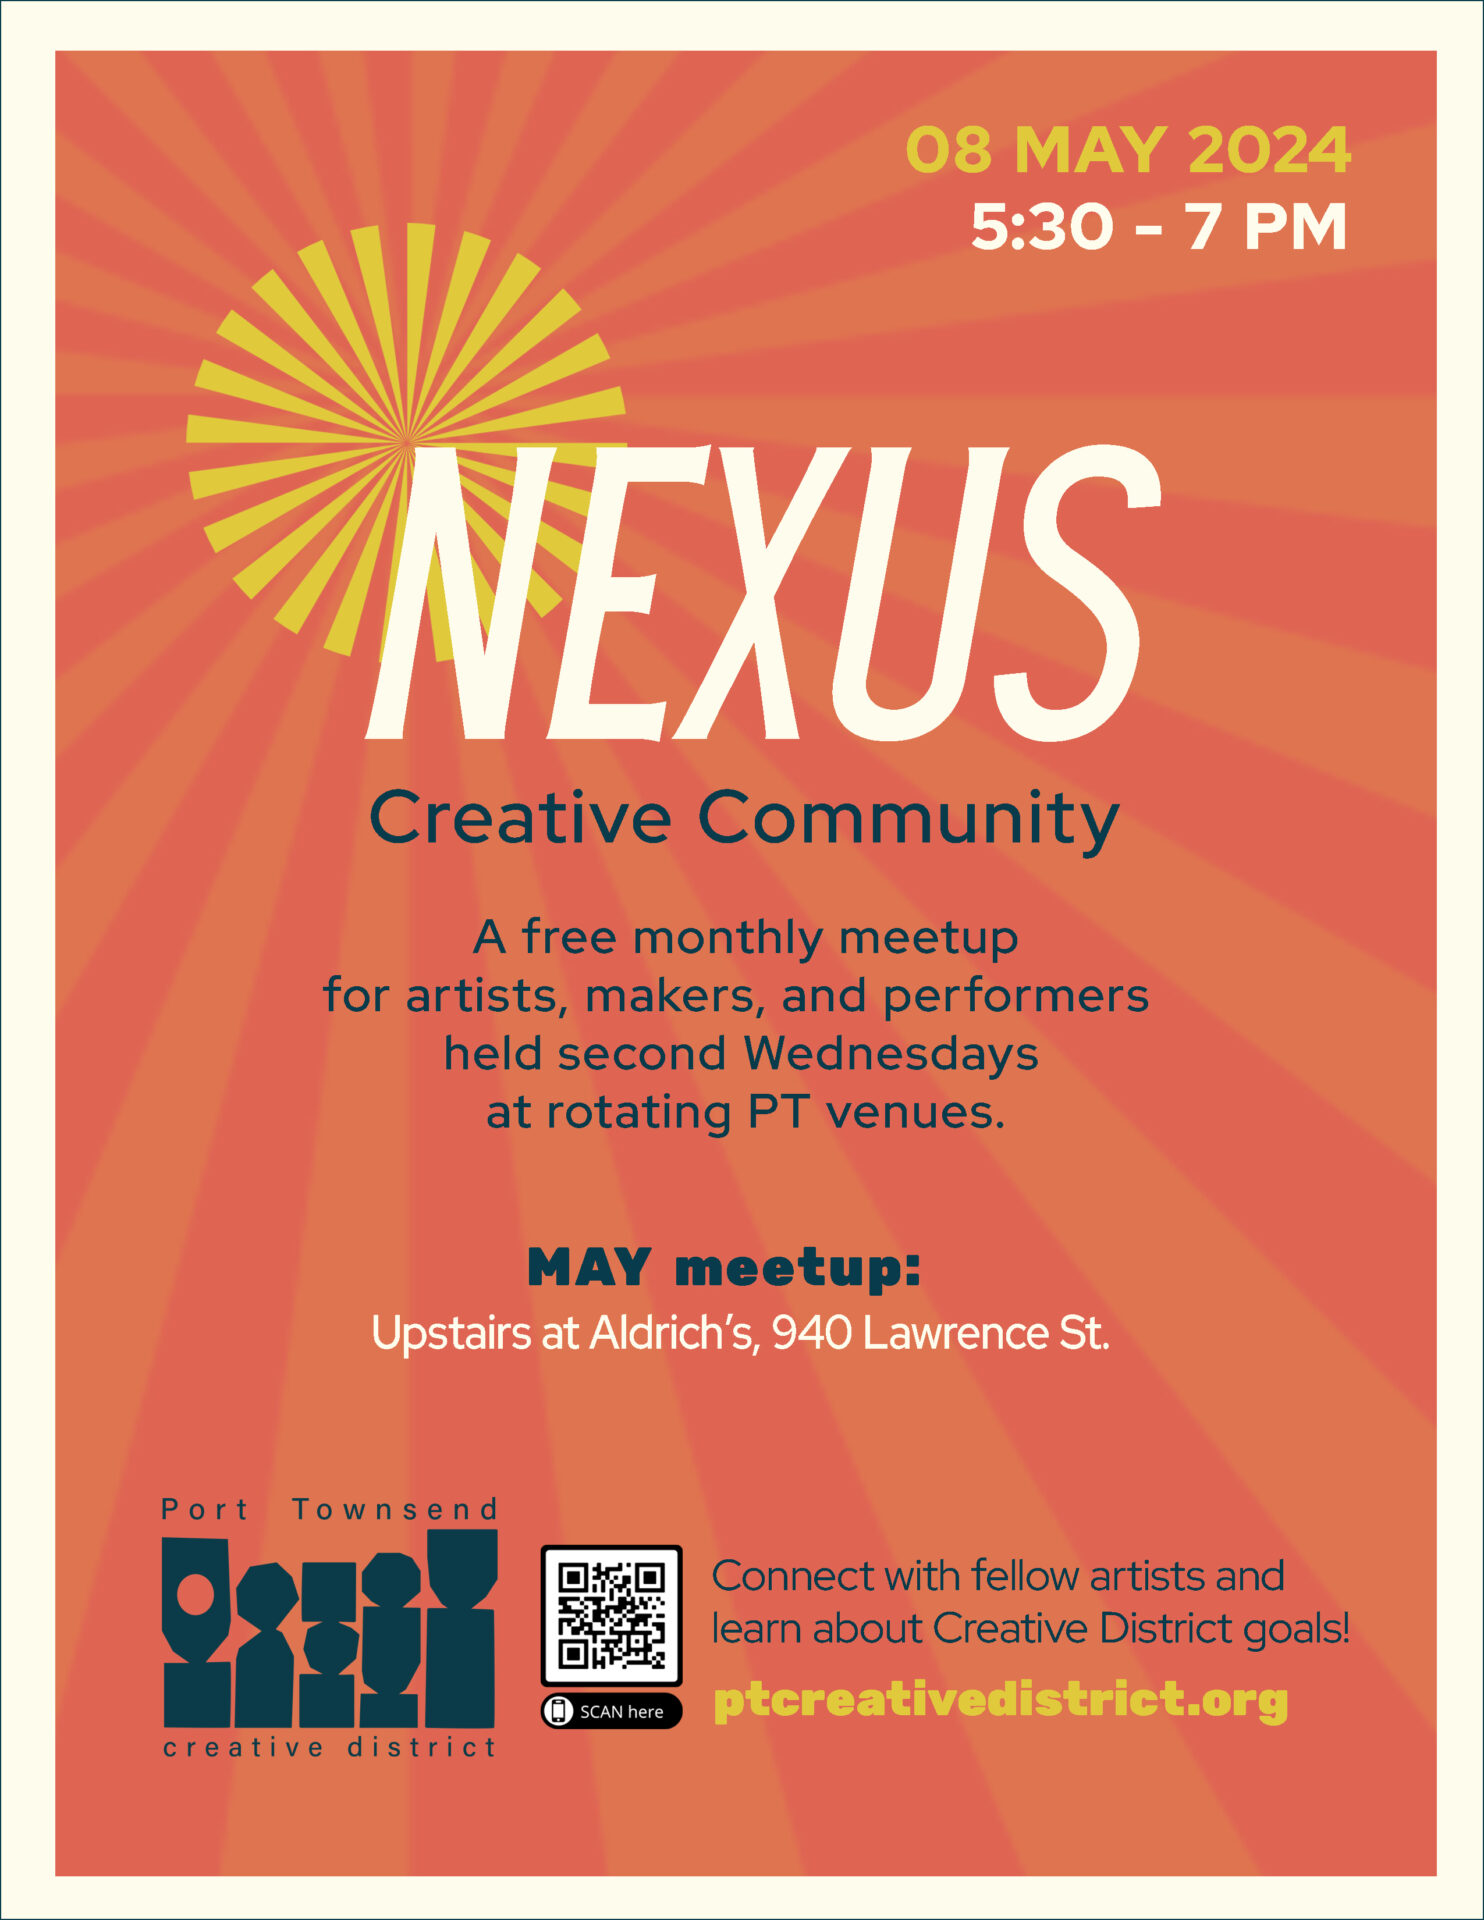 Flyer for Nexus meetup event, May 8 from 5:30 to 7pm at Aldrich's in Port Townsend